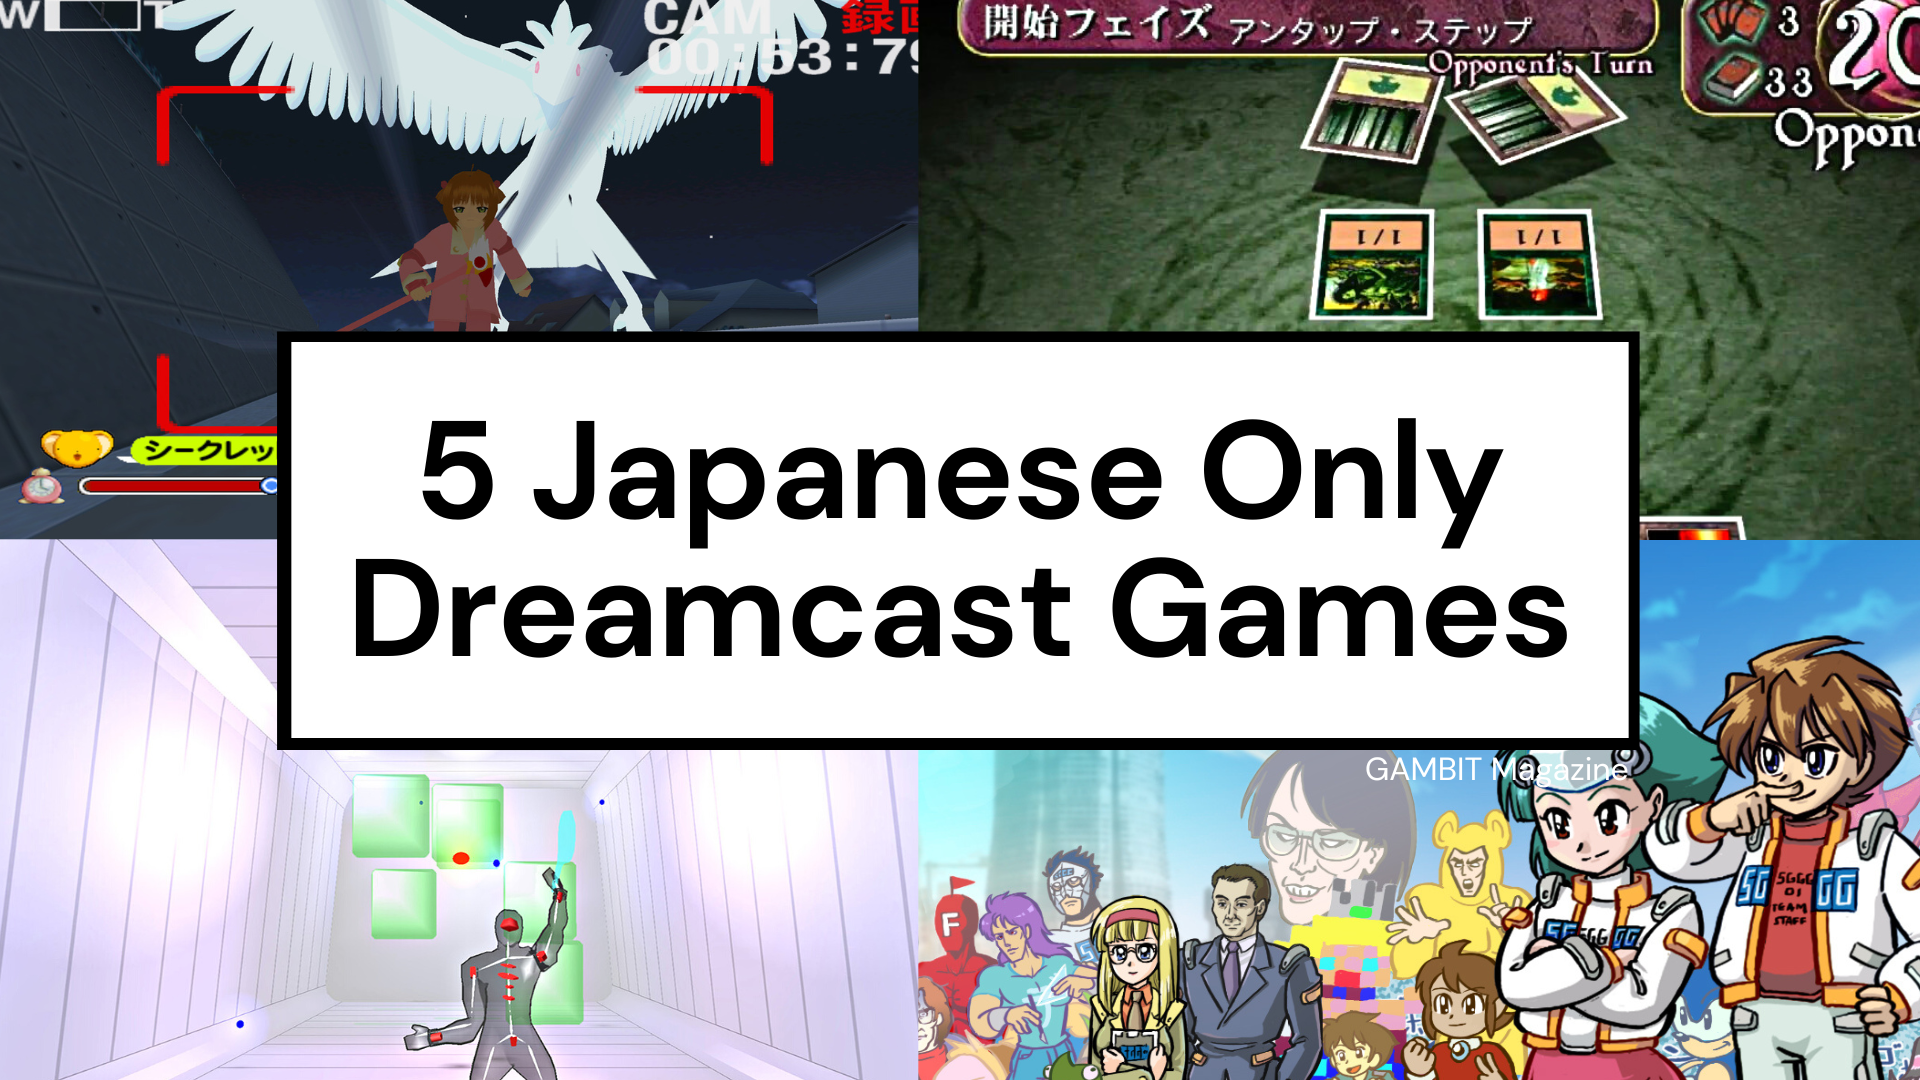 5 Japanese Only Dreamcast Games